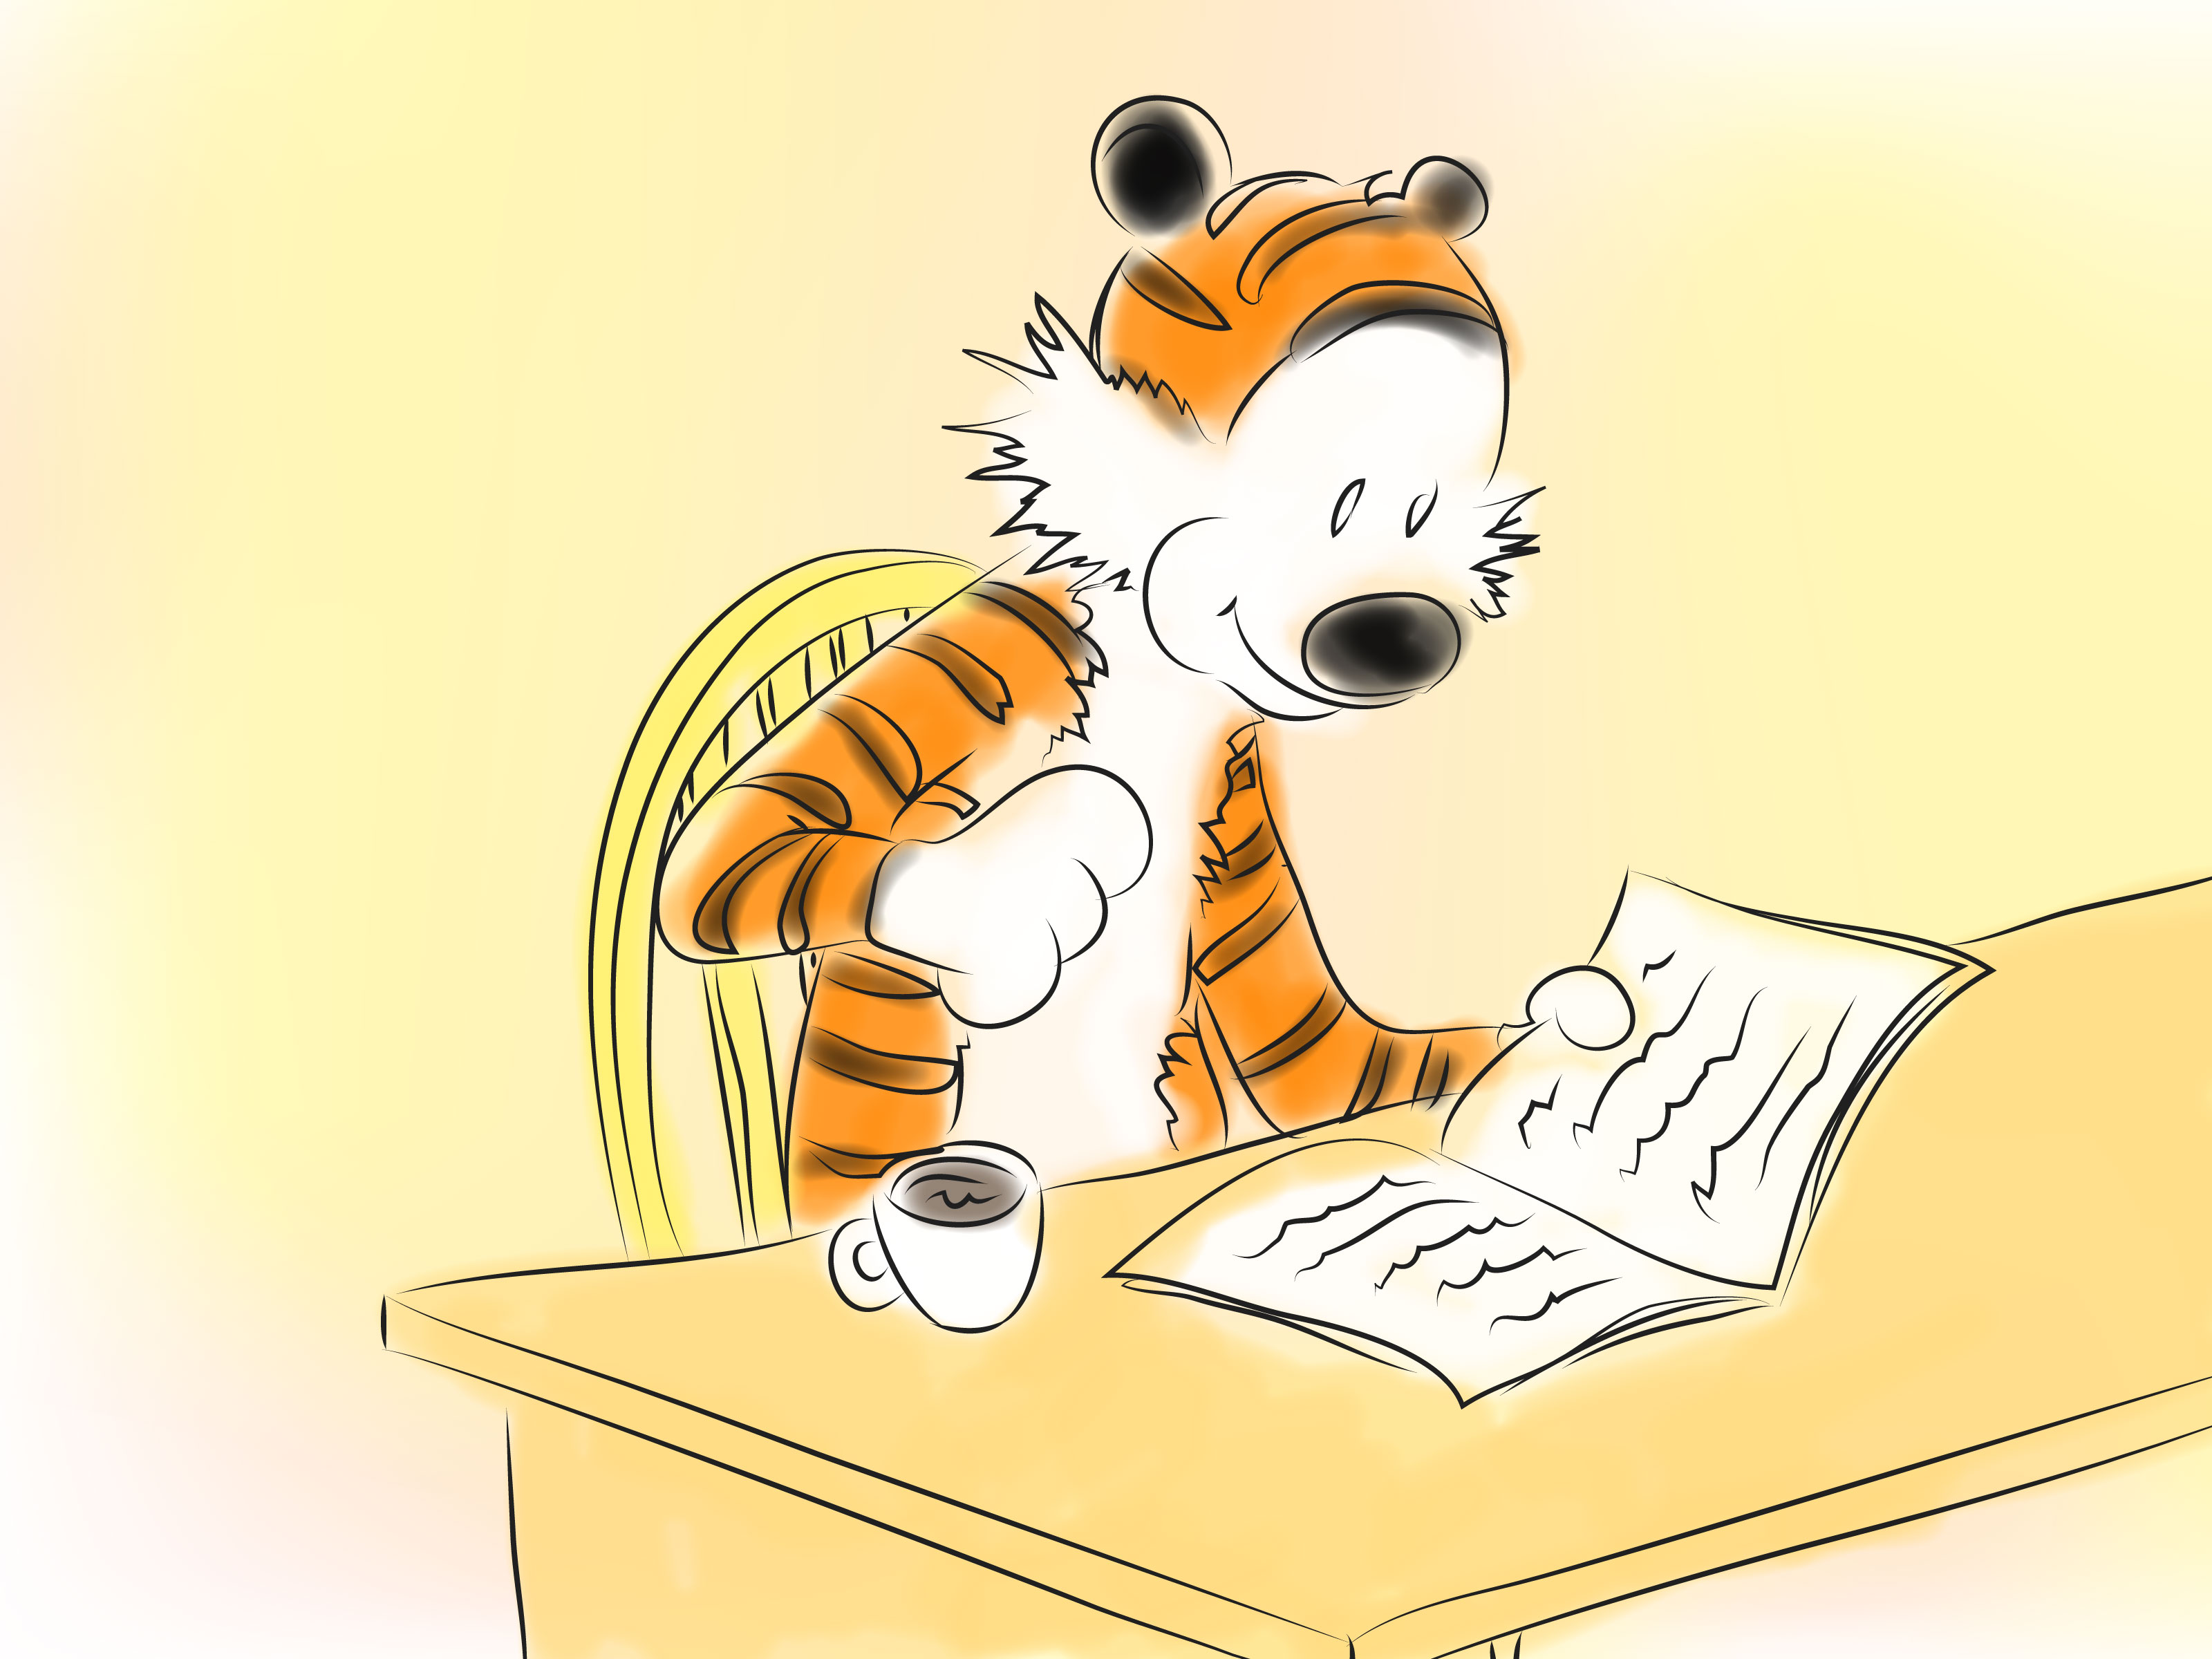 Dress up as hobbes from calvin and hobbes step 3